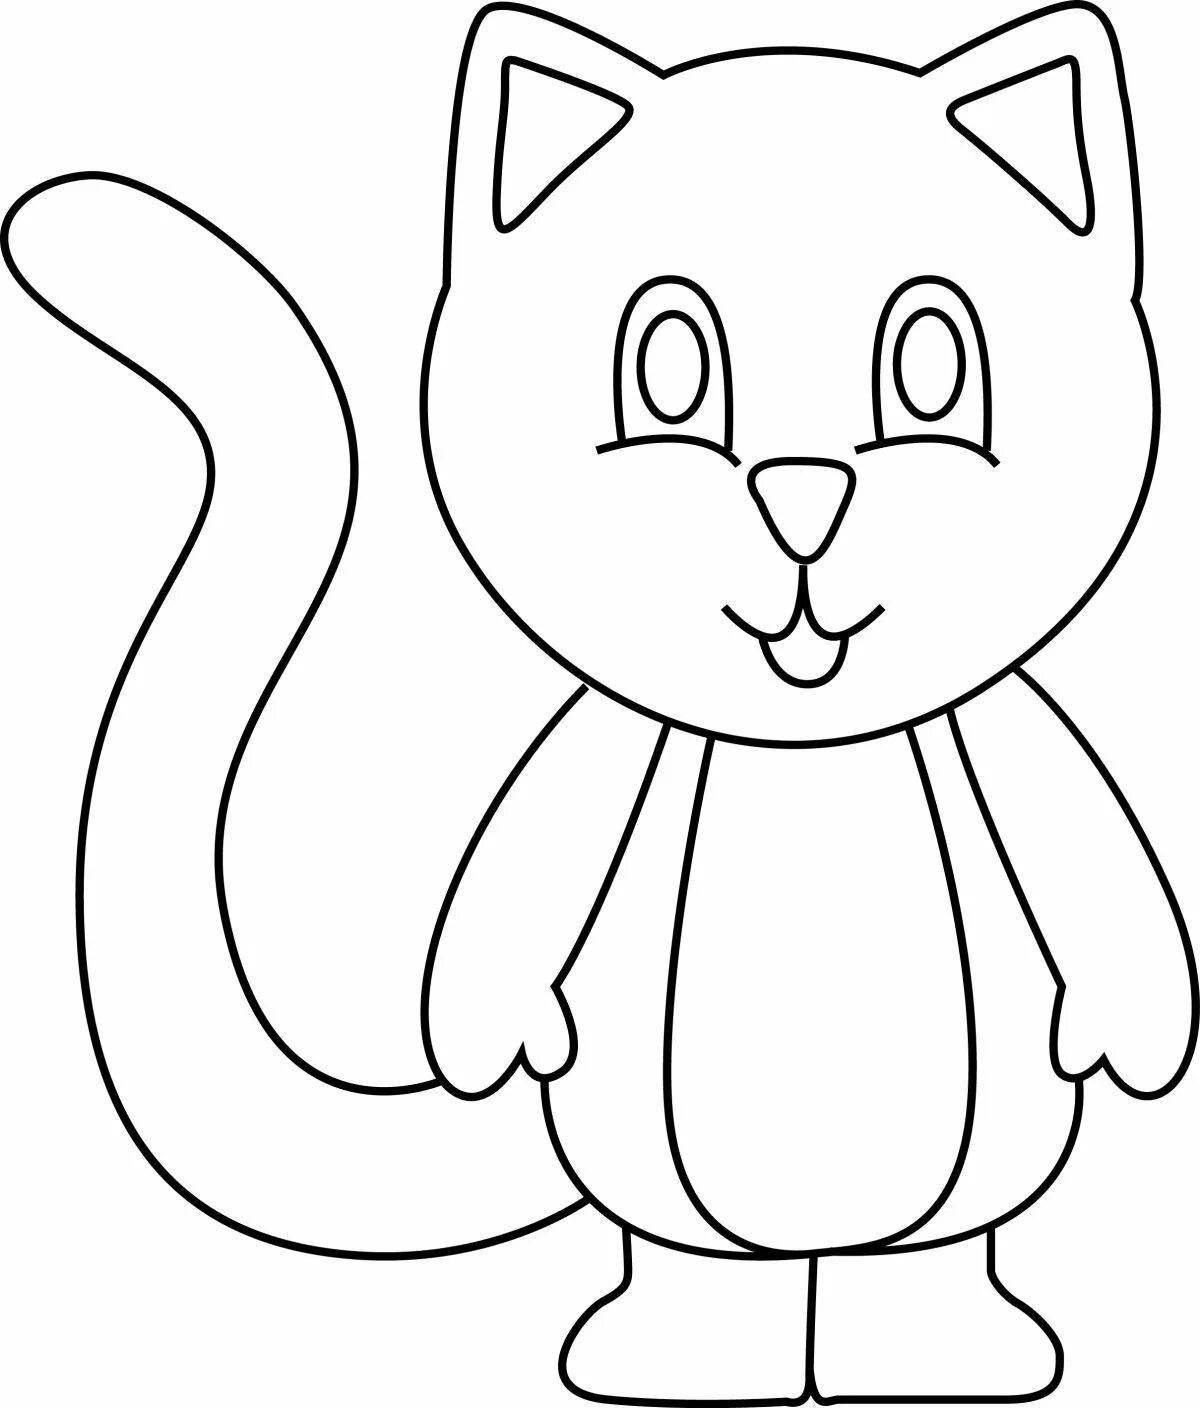 Fine coloring cat for children 4-5 years old